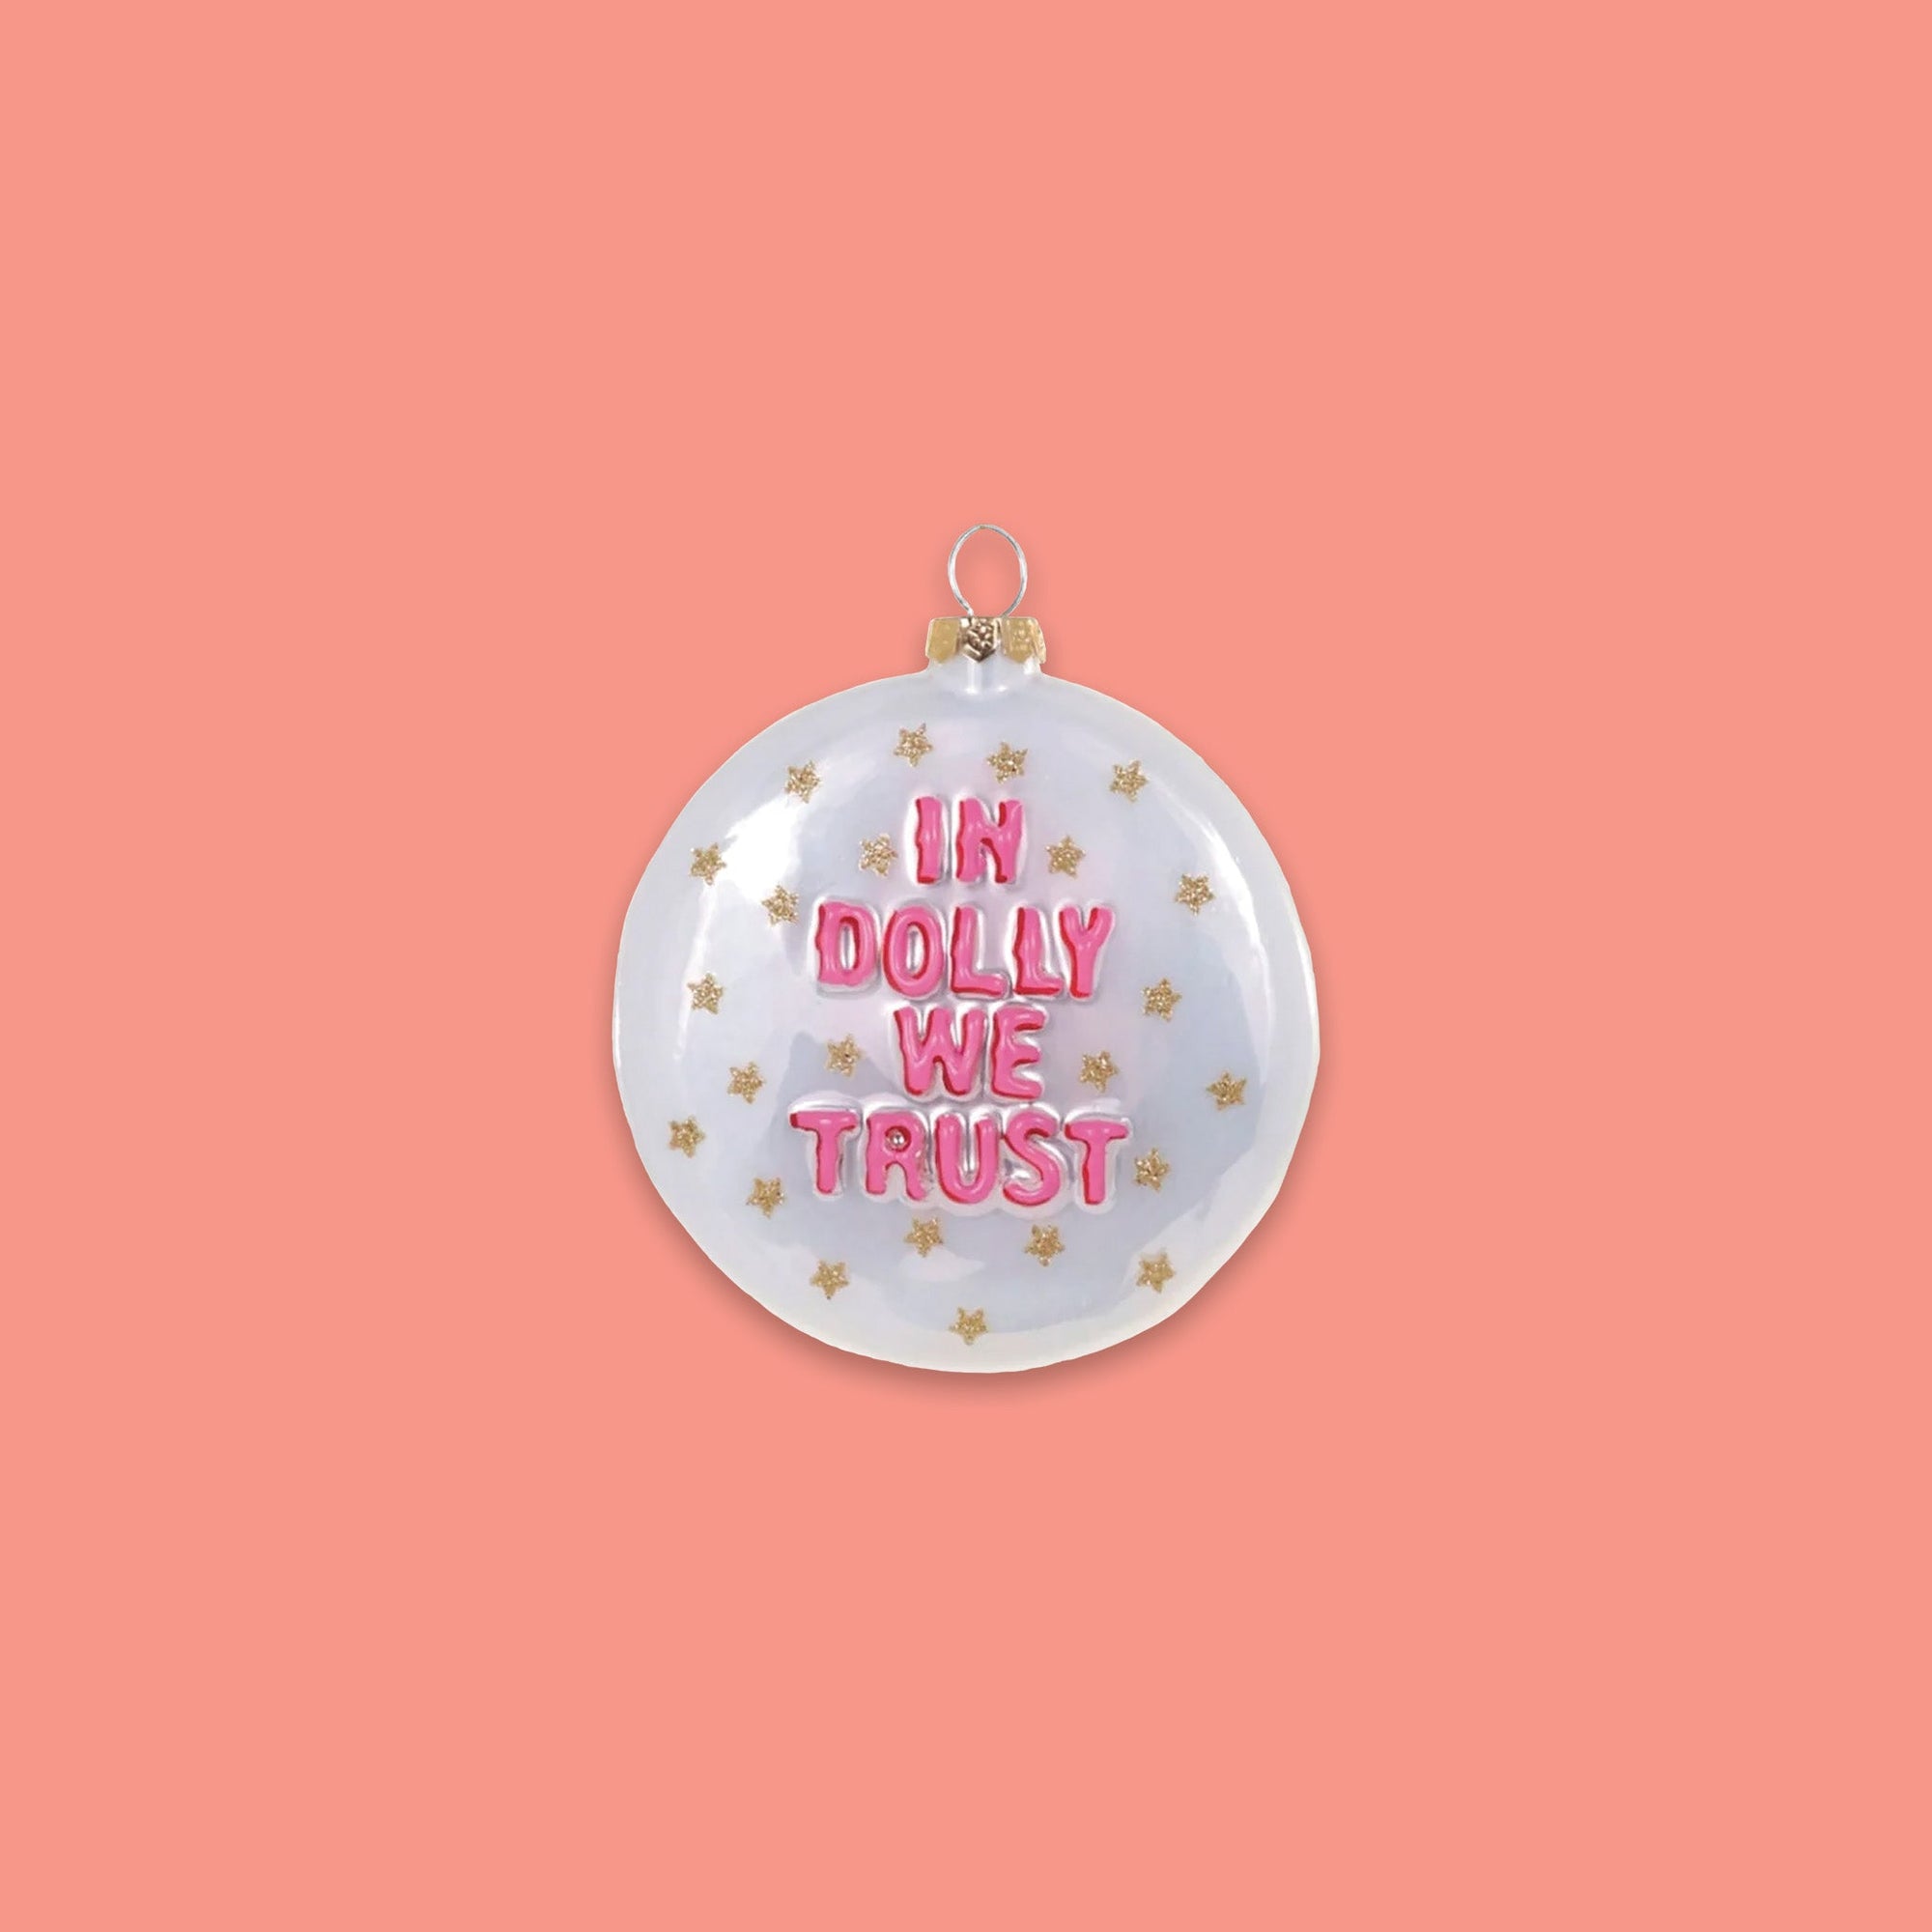 On a coral pink background sits a round ornament. This is a white ornament that has gold glitter stars and in pink it says "IN DOLLY WE TRUST."